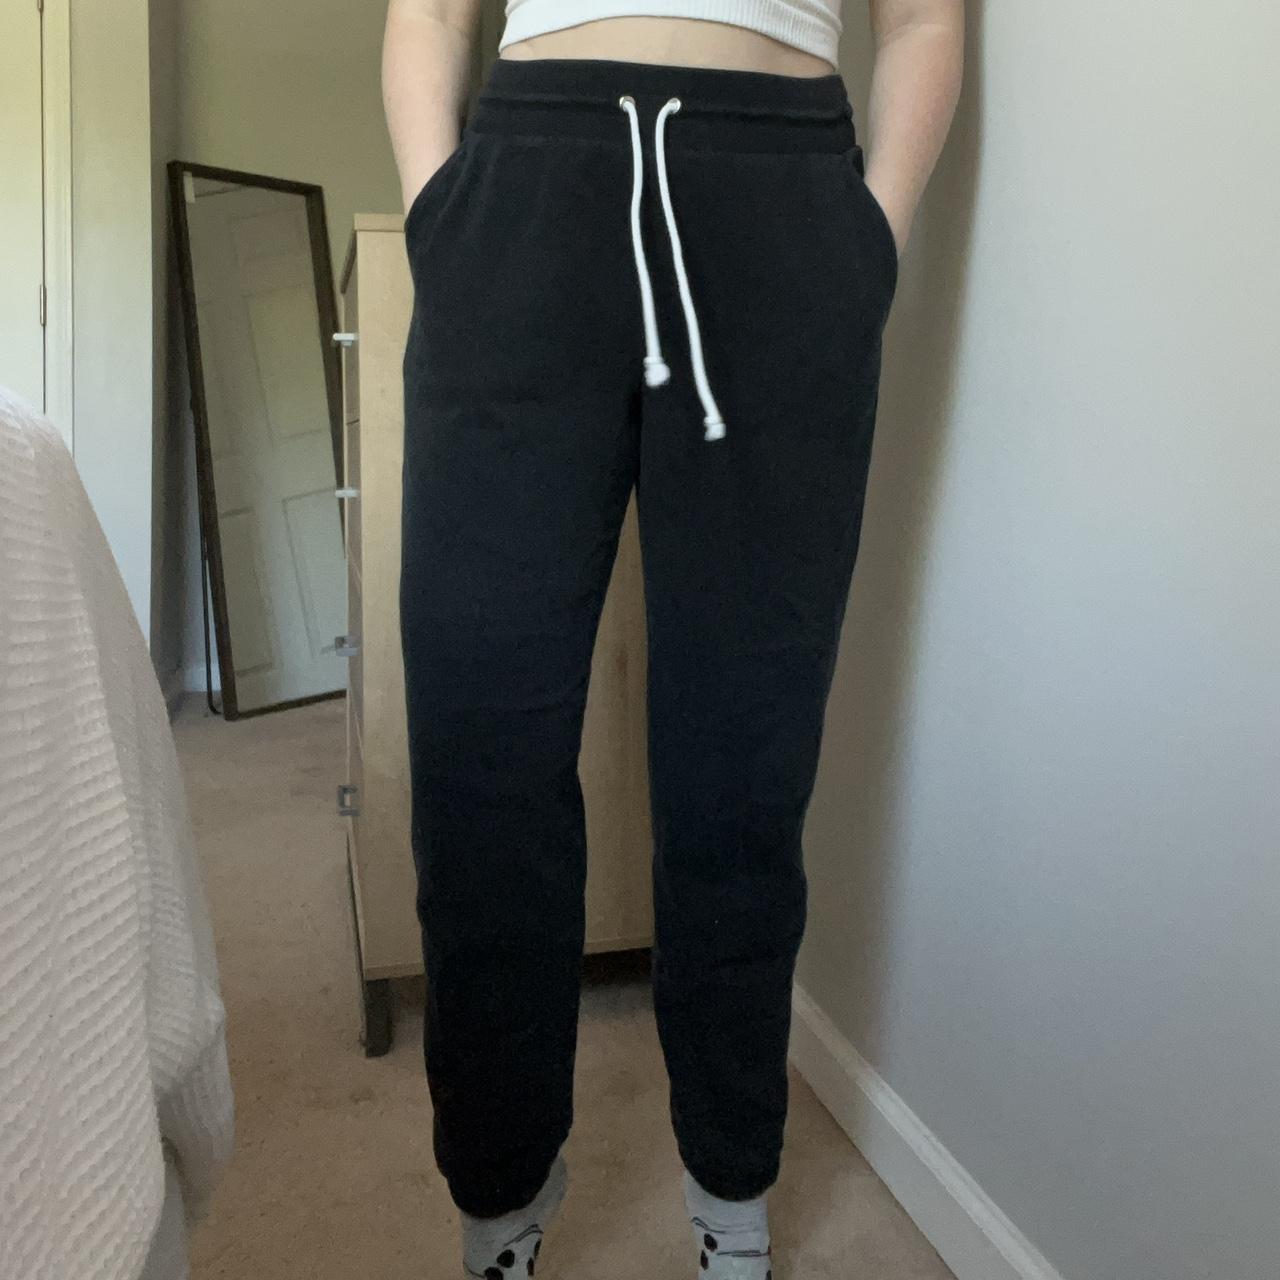 black drawstring jogger sweatpants from wild fable - Depop